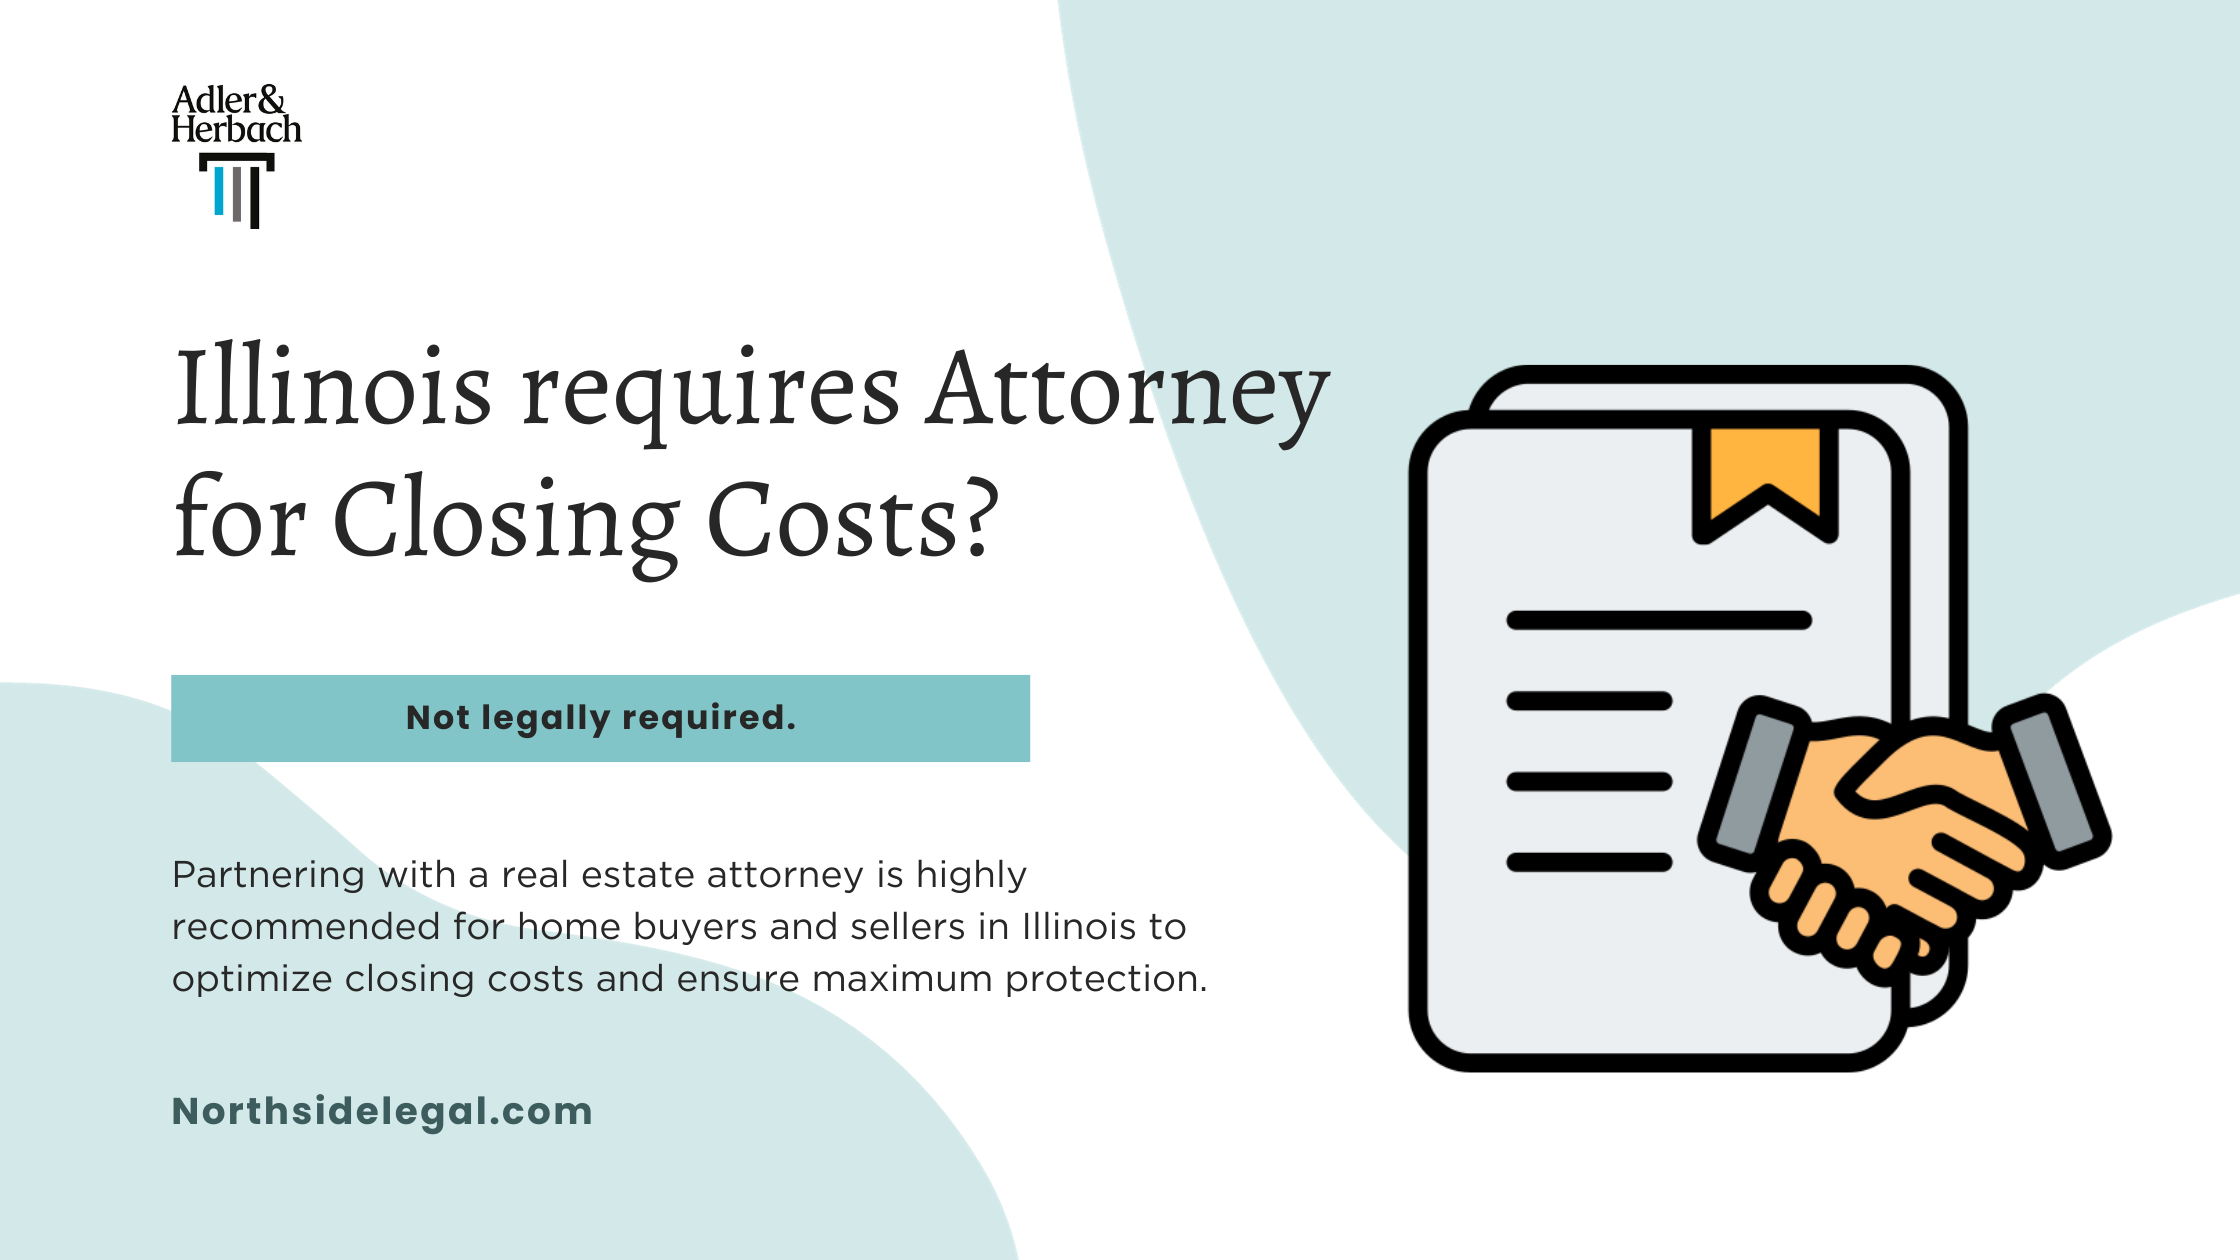 Does Illinois Require an Attorney for Closing Costs?